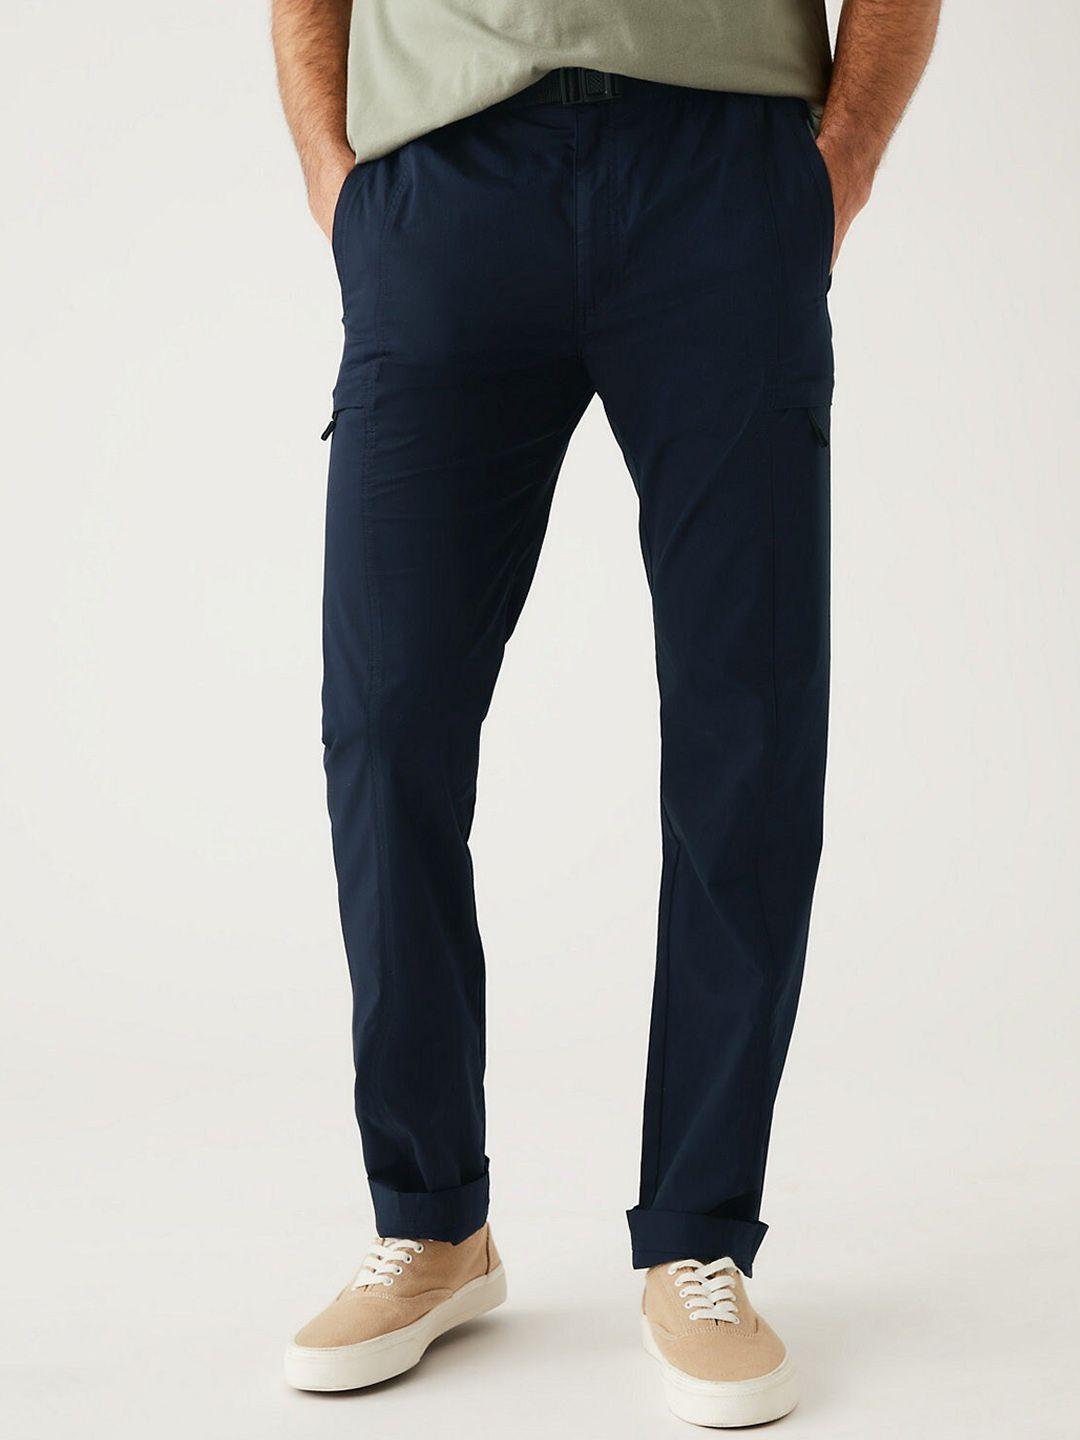 marks & spencer men mid-rise casual cotton track pants